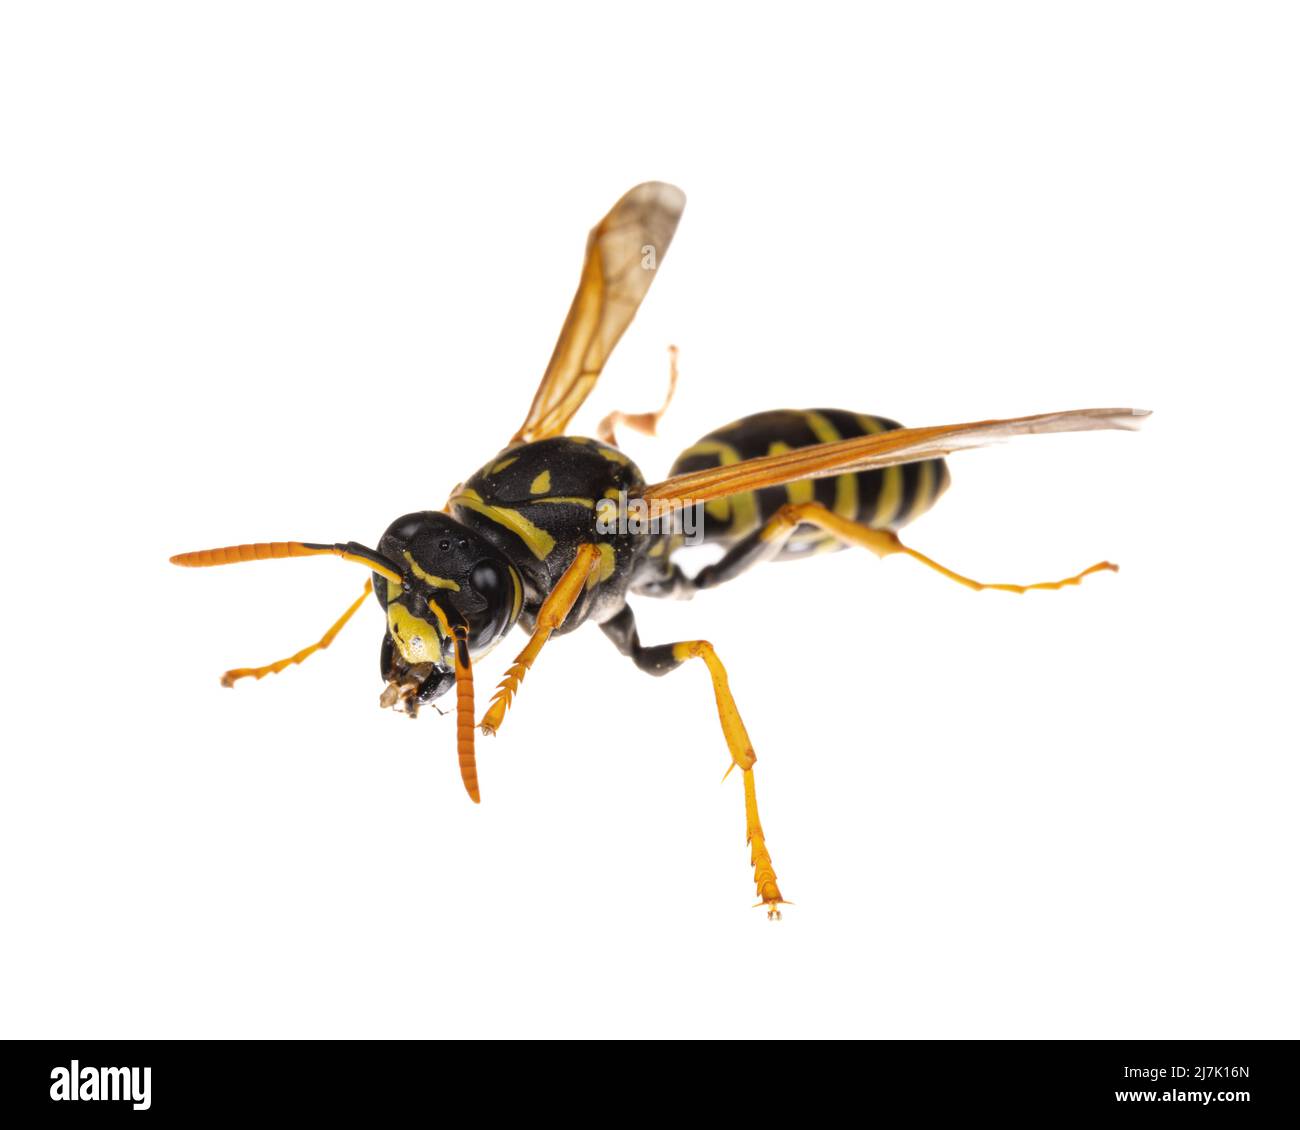 insects of europe - wasps: macro of European paper wasp ( Polistes dominula)  isolated on white background - diagonal view Stock Photo